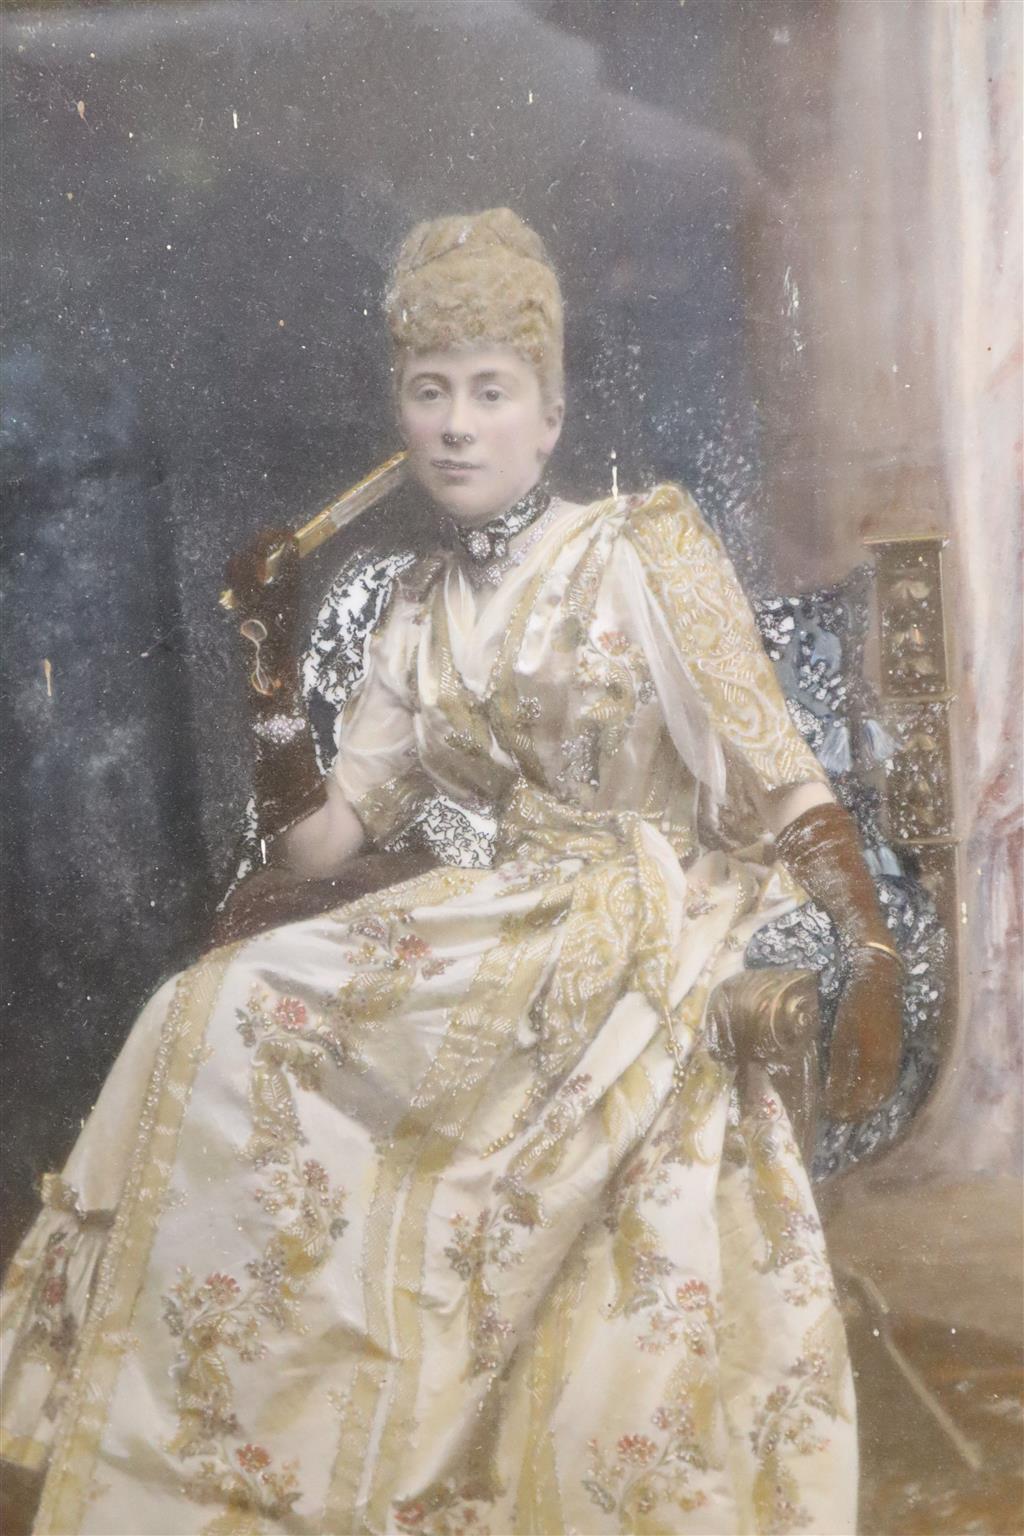 An Edwardian hand tinted photographic portrait of a seated lady, in ornate frame, image 29 x 24cm